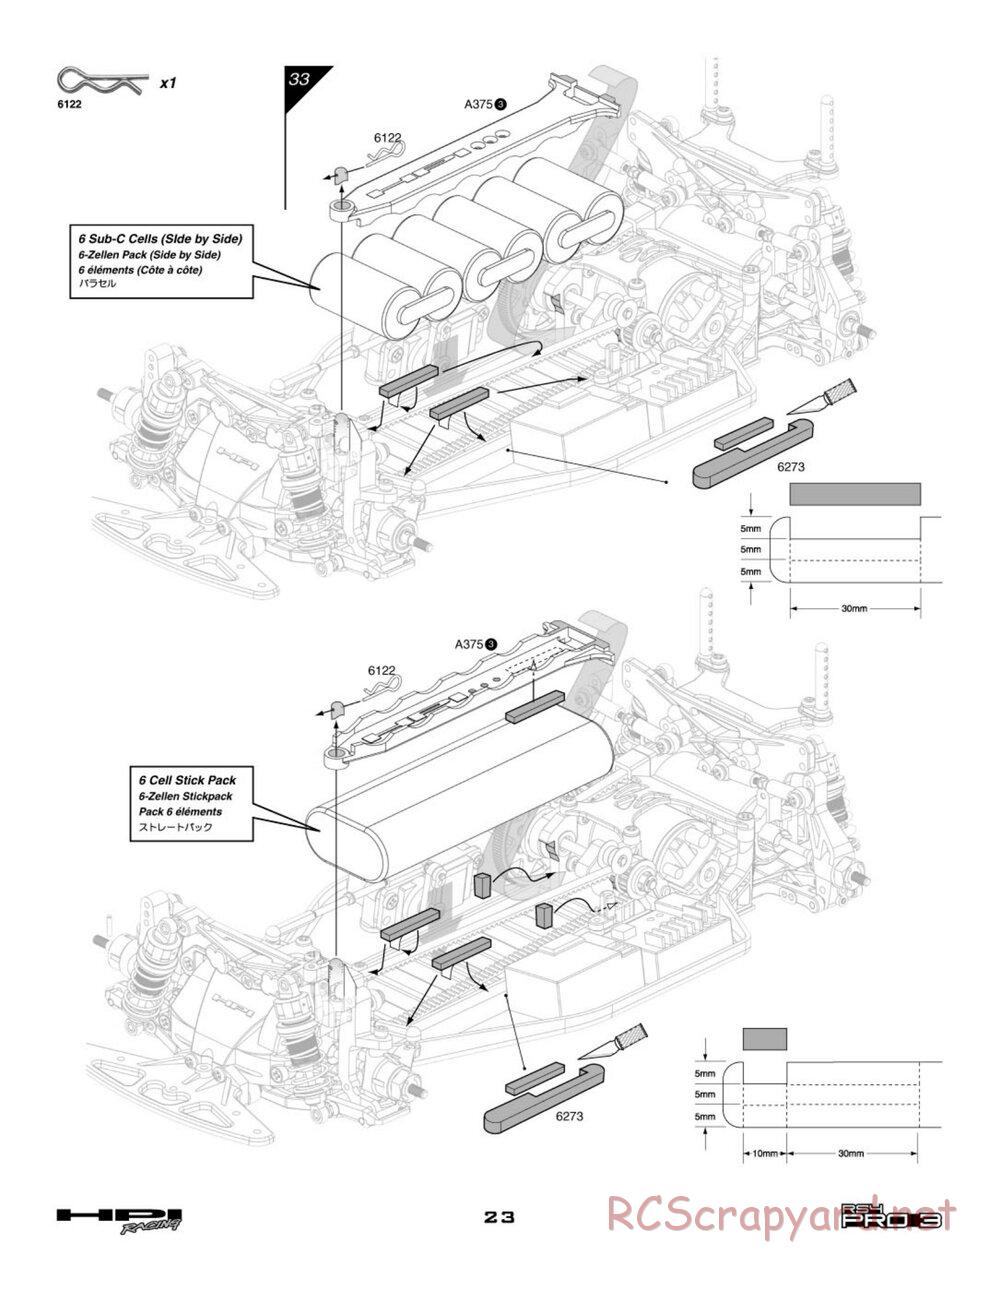 HPI - RS4 Pro 3 - Manual - Page 23